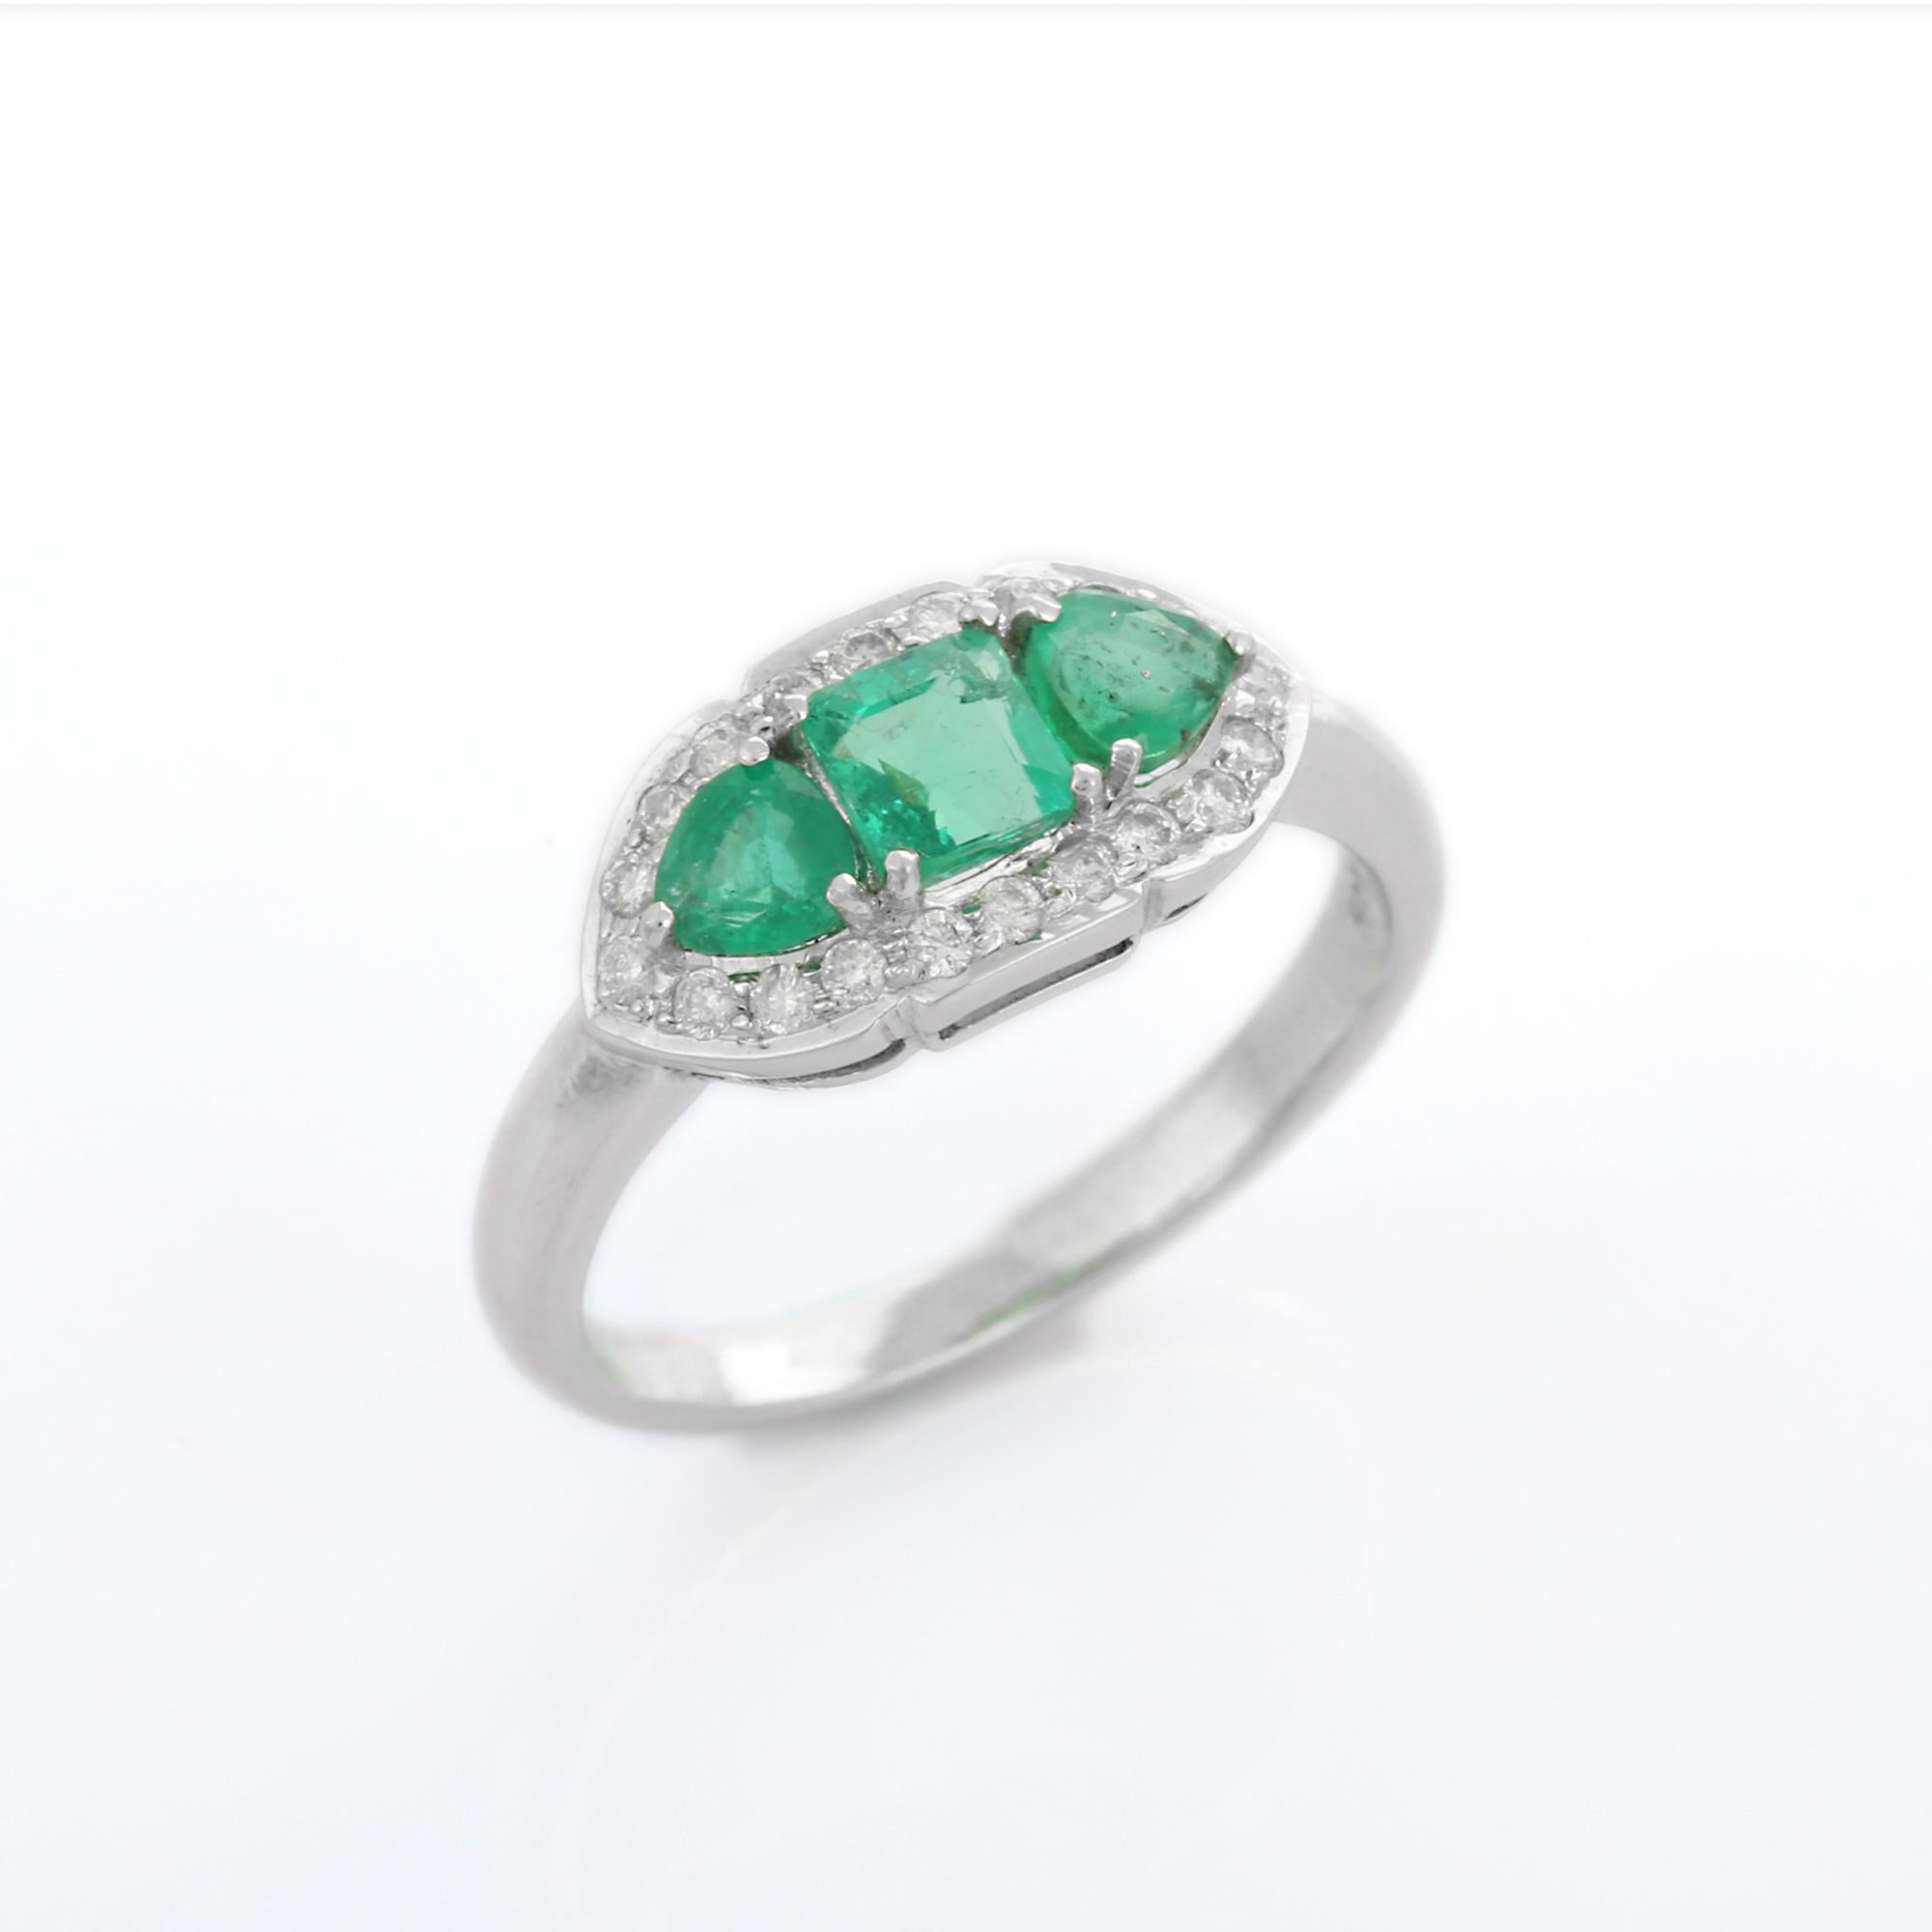 For Sale:  Three Stone Emerald and Diamond Ring in 18K White Gold  10